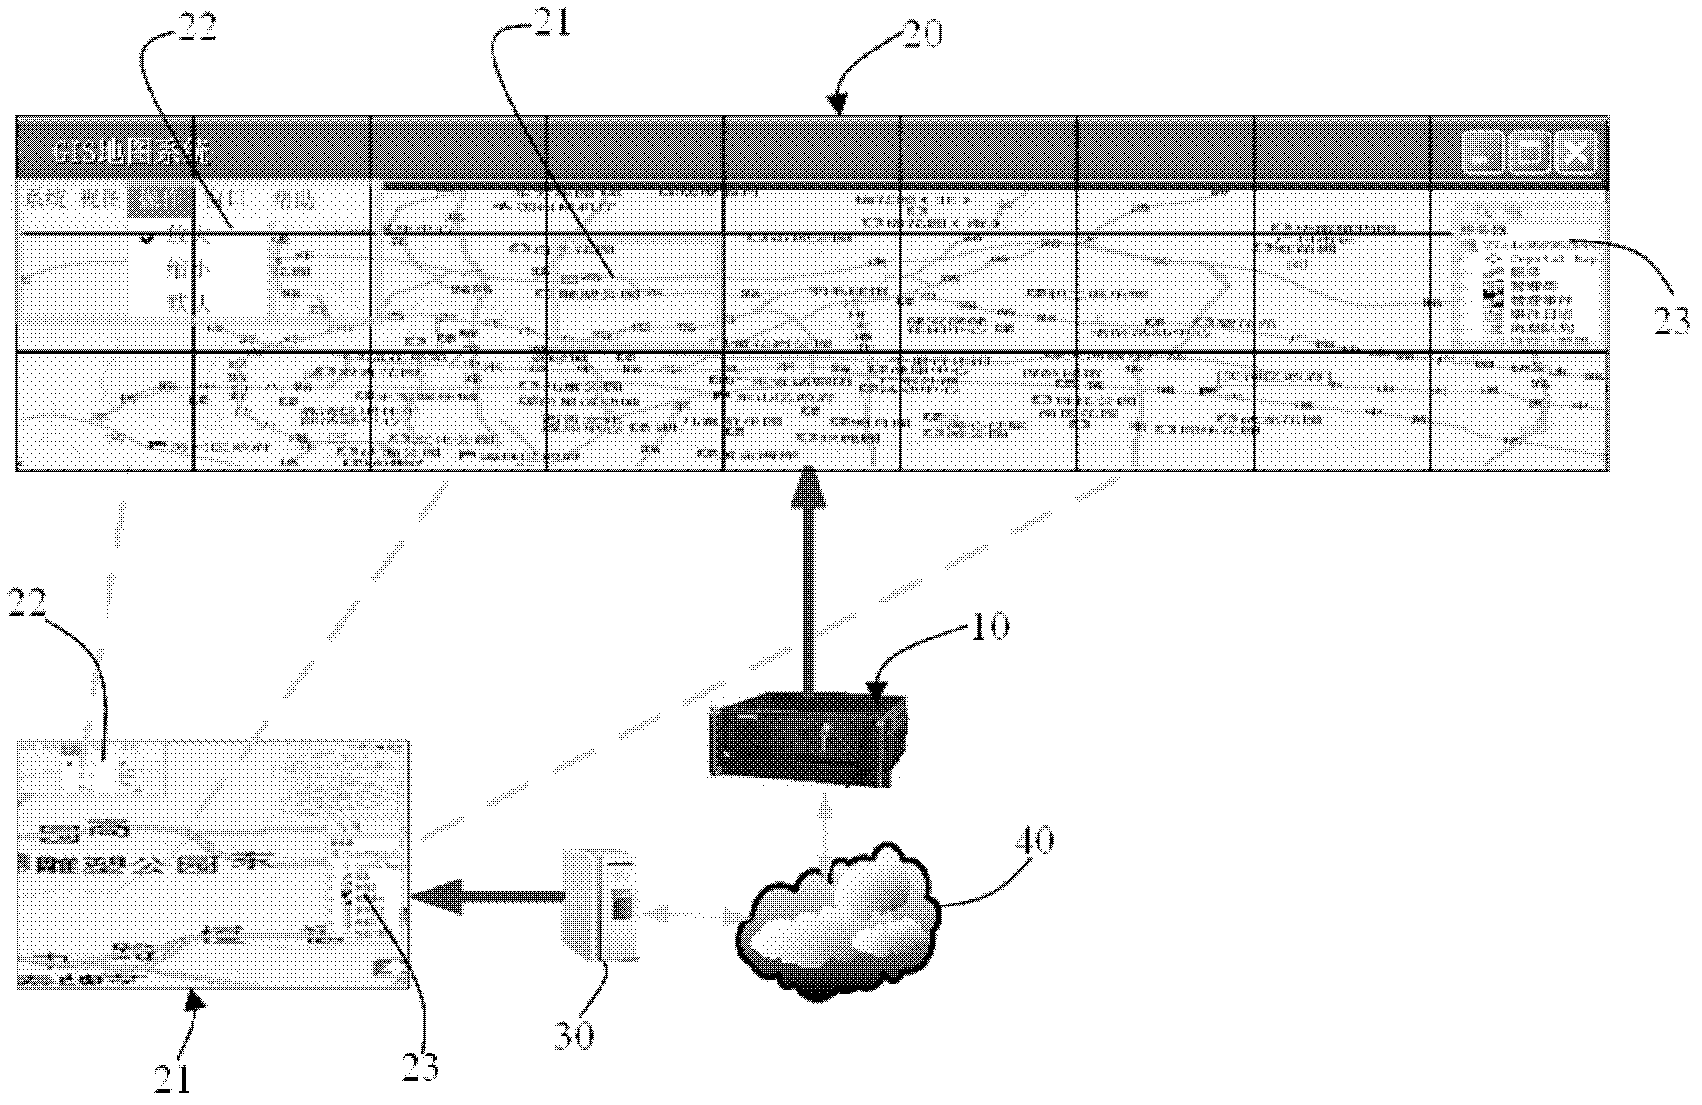 Synchronous control method of remote high-resolution display system